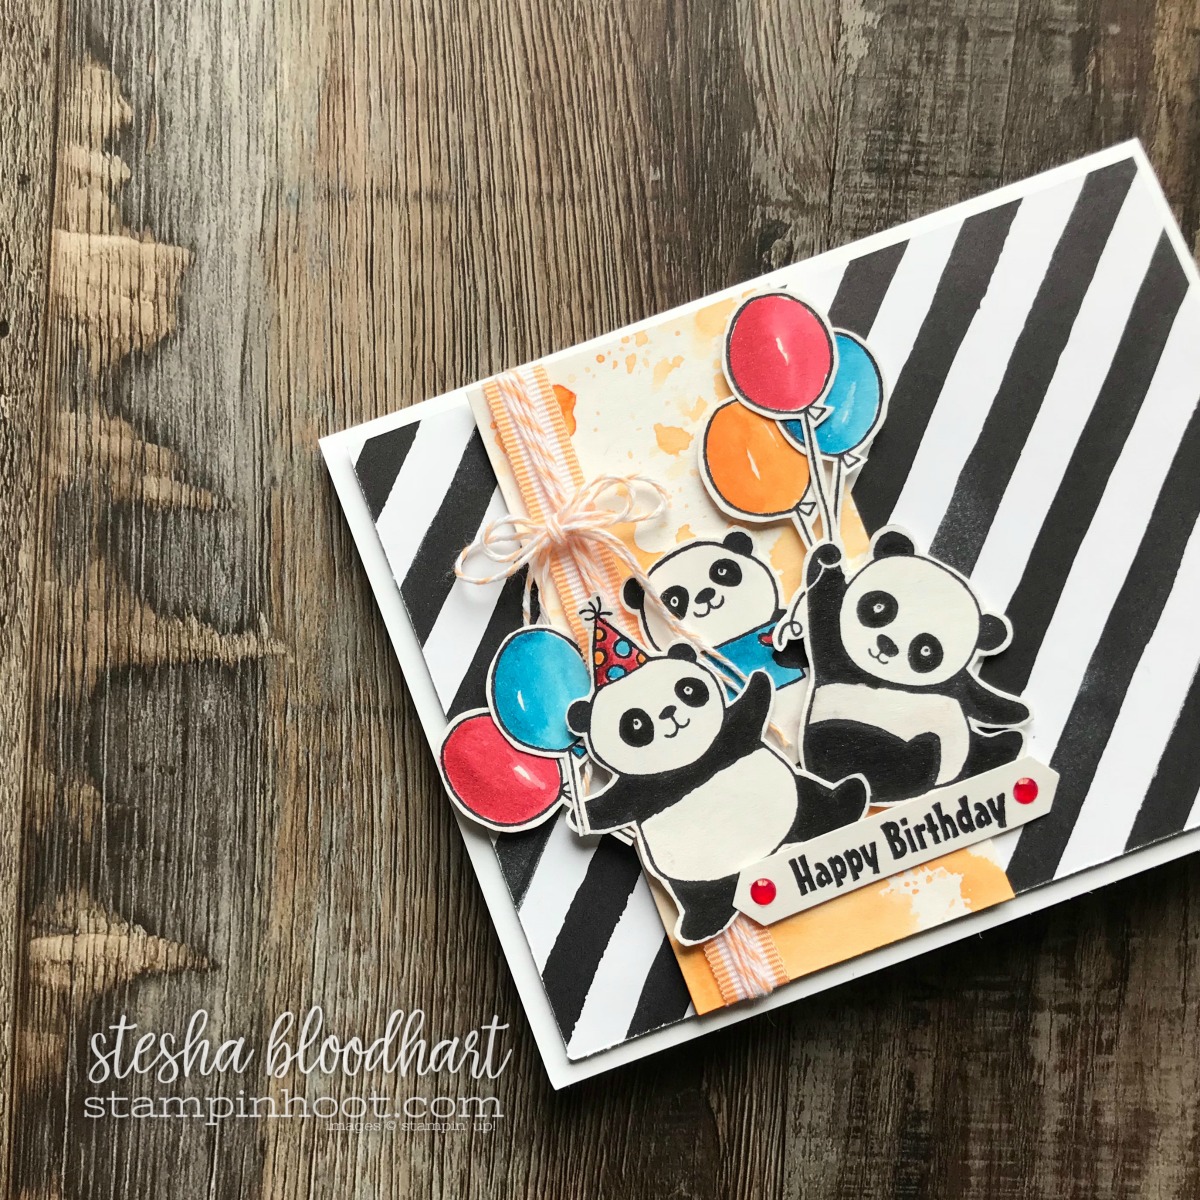 Party Pandas Level 1 Sale-A-Bration Stamp Set by Stampin' Up! Birthday Card created by Stesha Bloodhart, Stampin' Hoot! #steshabloodhart #stampinhoot